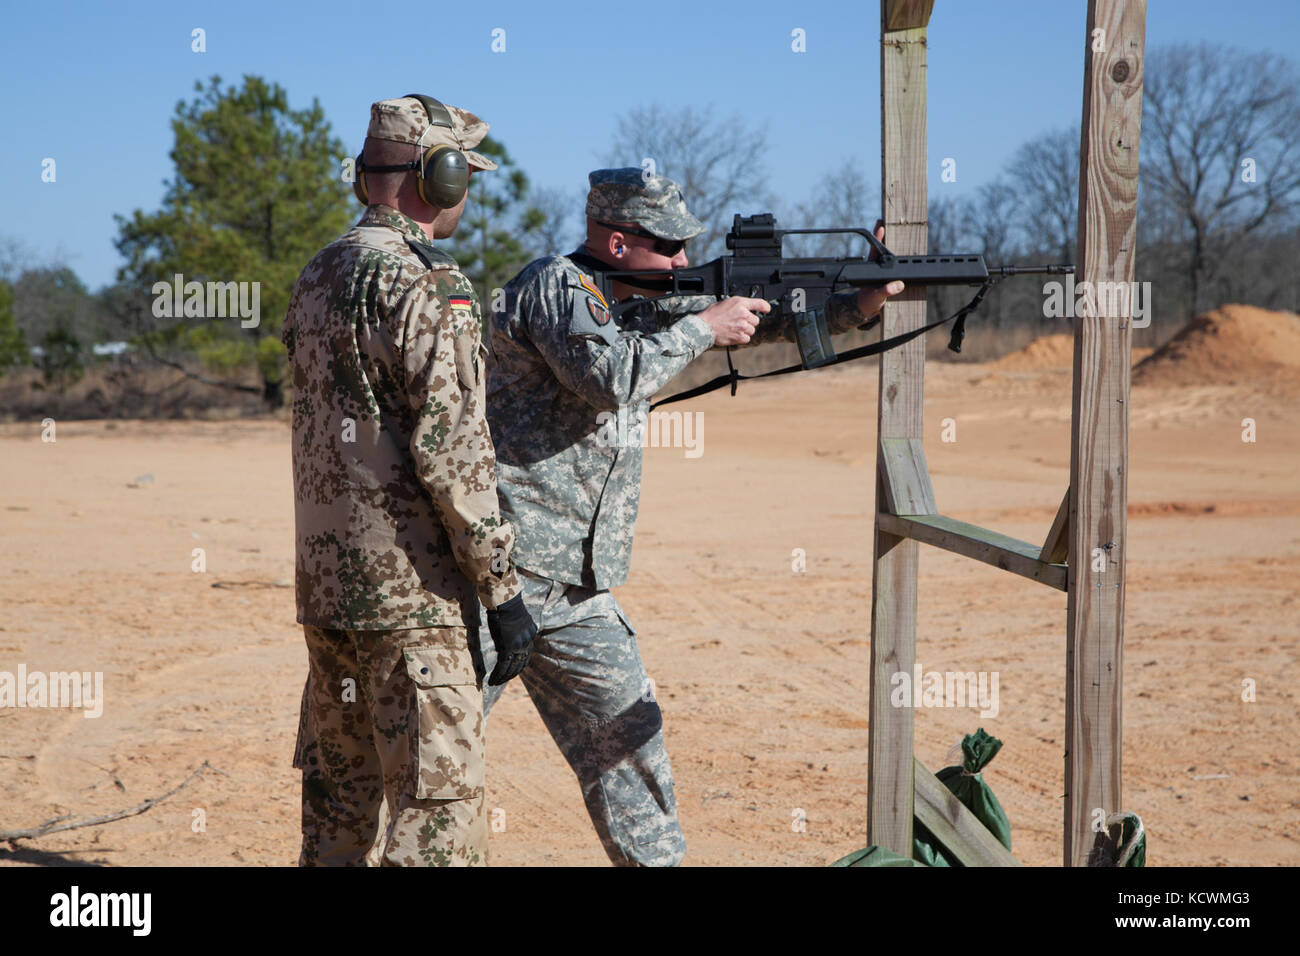 German Armed Forces Spc. Kai Feyand observes U.S. Army Sgt. Christopher Barefoot as South Carolina National Guard Soldiers and Airmen participate in a live-fire German Proficiency Marksmanship Badge qualification at Fort Jackson, South Carolina with the assistance of Soldiers from the German Armed Forces Command, Mar. 9, 2017. The South Carolina National Guard service members utilized the German MG 3 machine gun, P8 pistol, and G36 assault rifle during the event. (U.S. Army National Guard photo by Capt. Brian Hare) Stock Photo